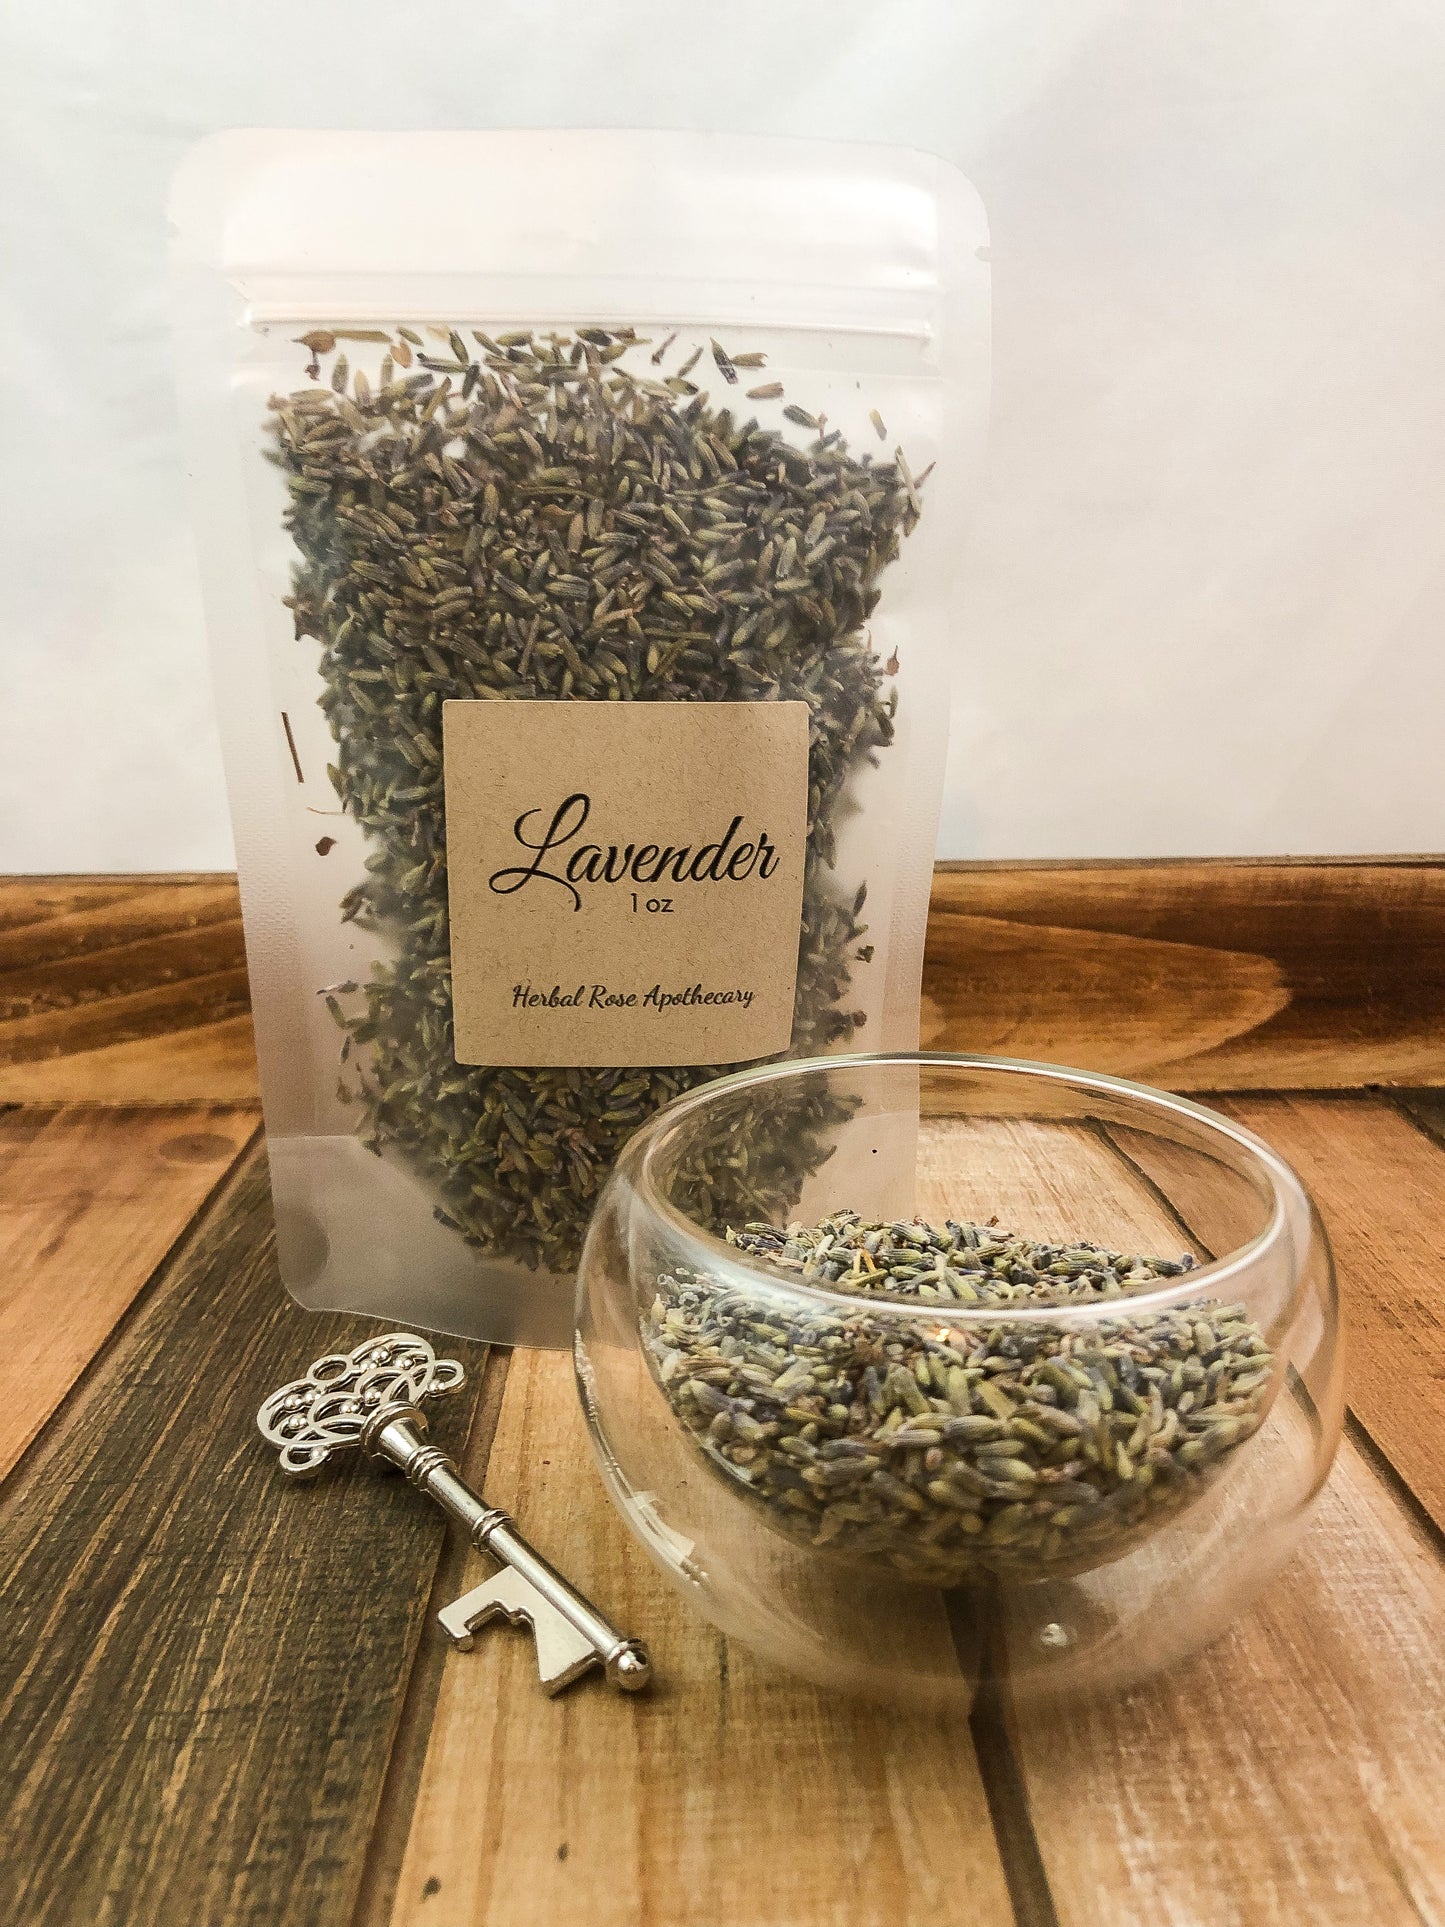 dried lavender in a clear 1oz bag next to a small clear glass cup of dried lavender, silver key laying in forefront, items on a wooden table with a white background